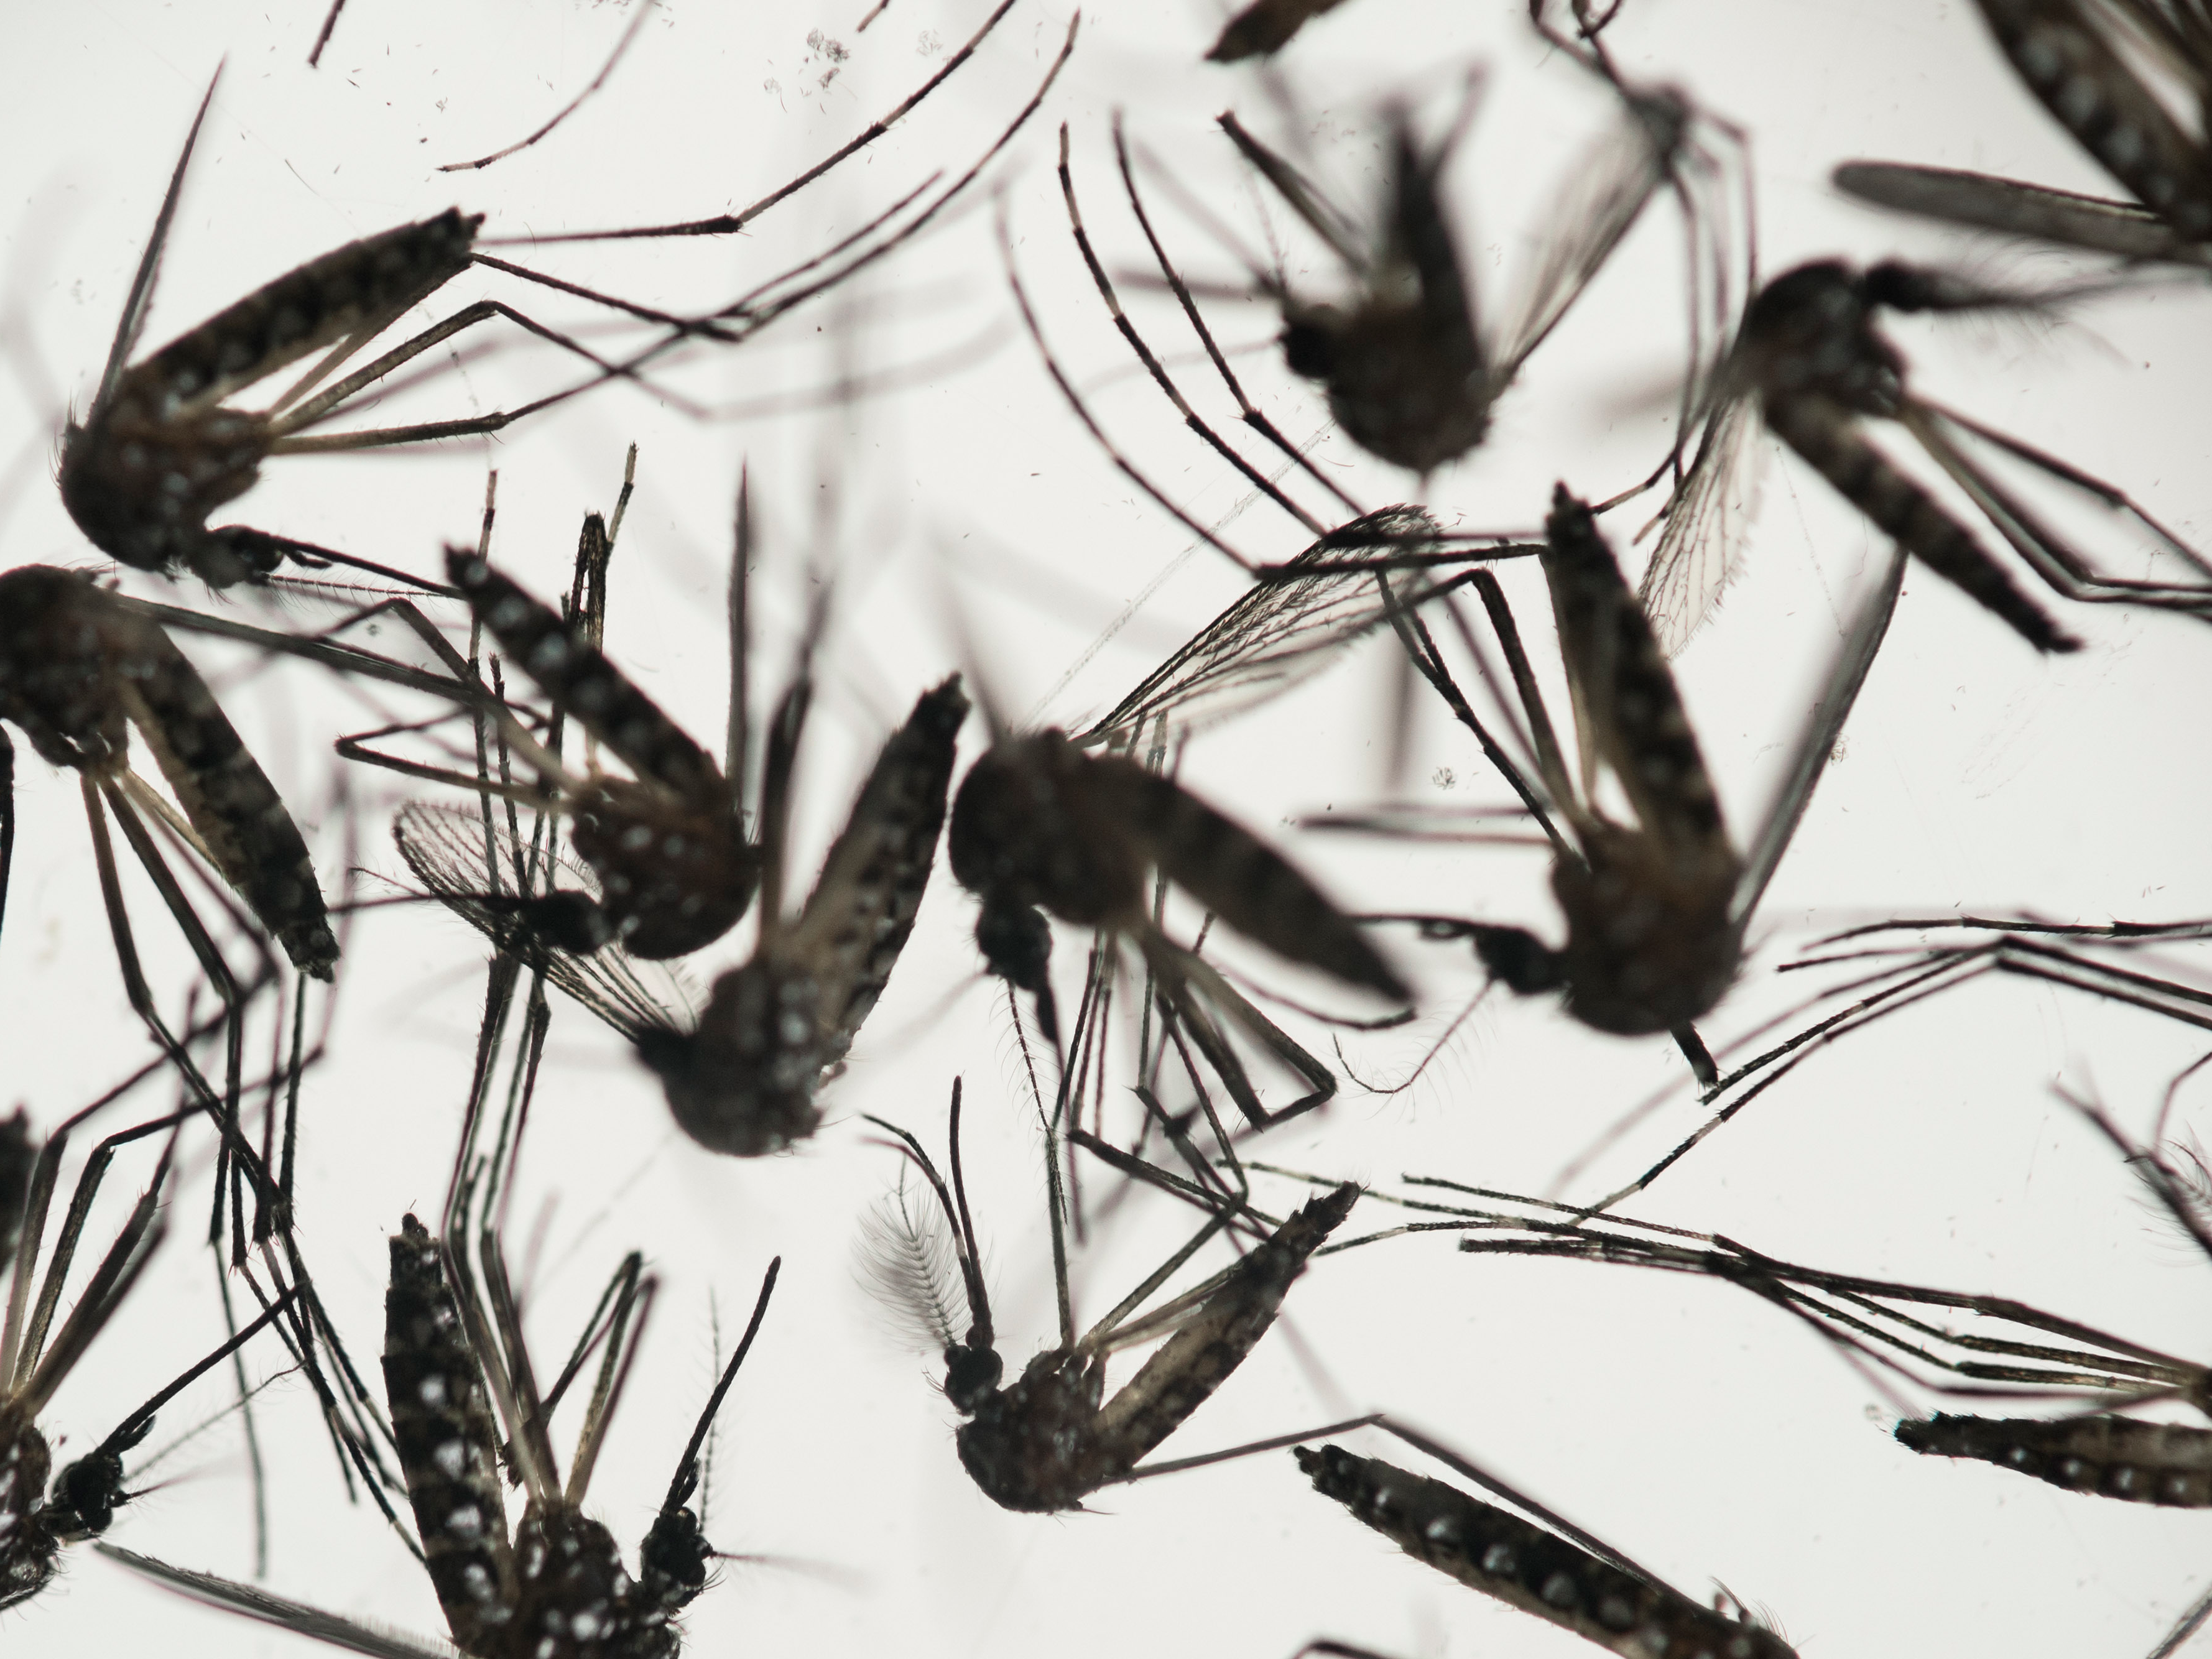 The Possibility of a Zika Invasion in the U.S.